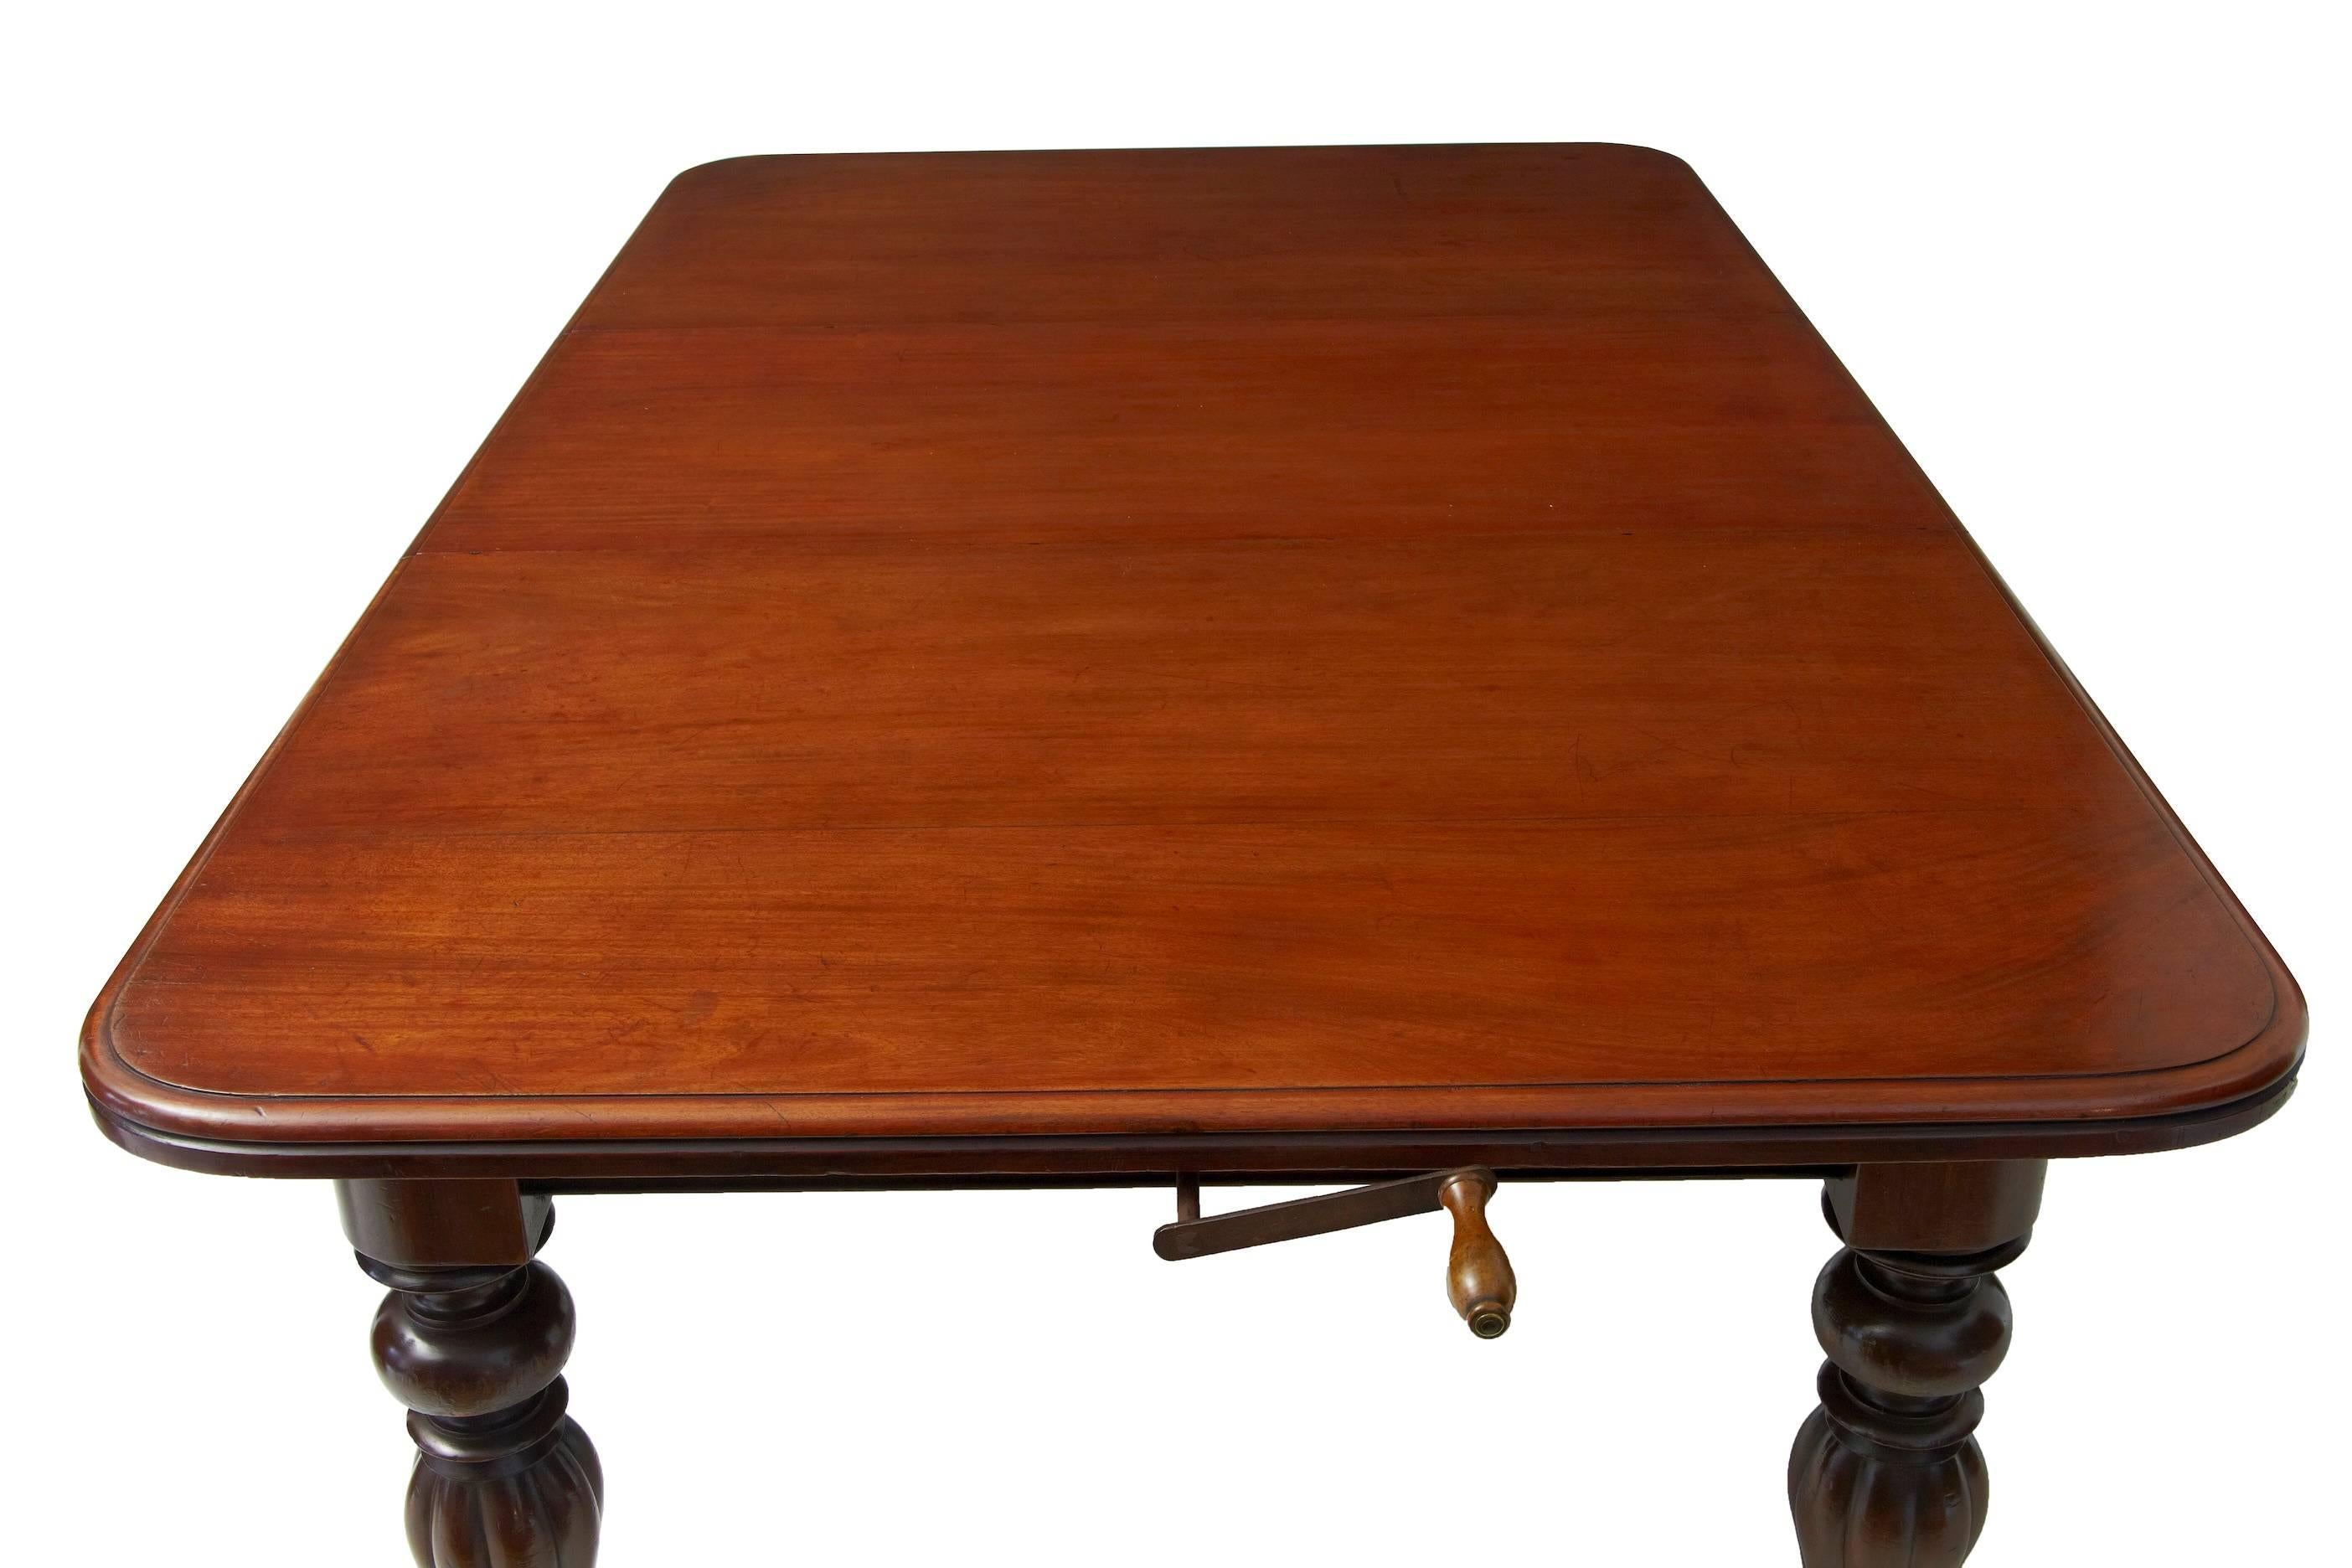 Great Britain (UK) 19th Century Victorian Mahogany Extending Dining Table